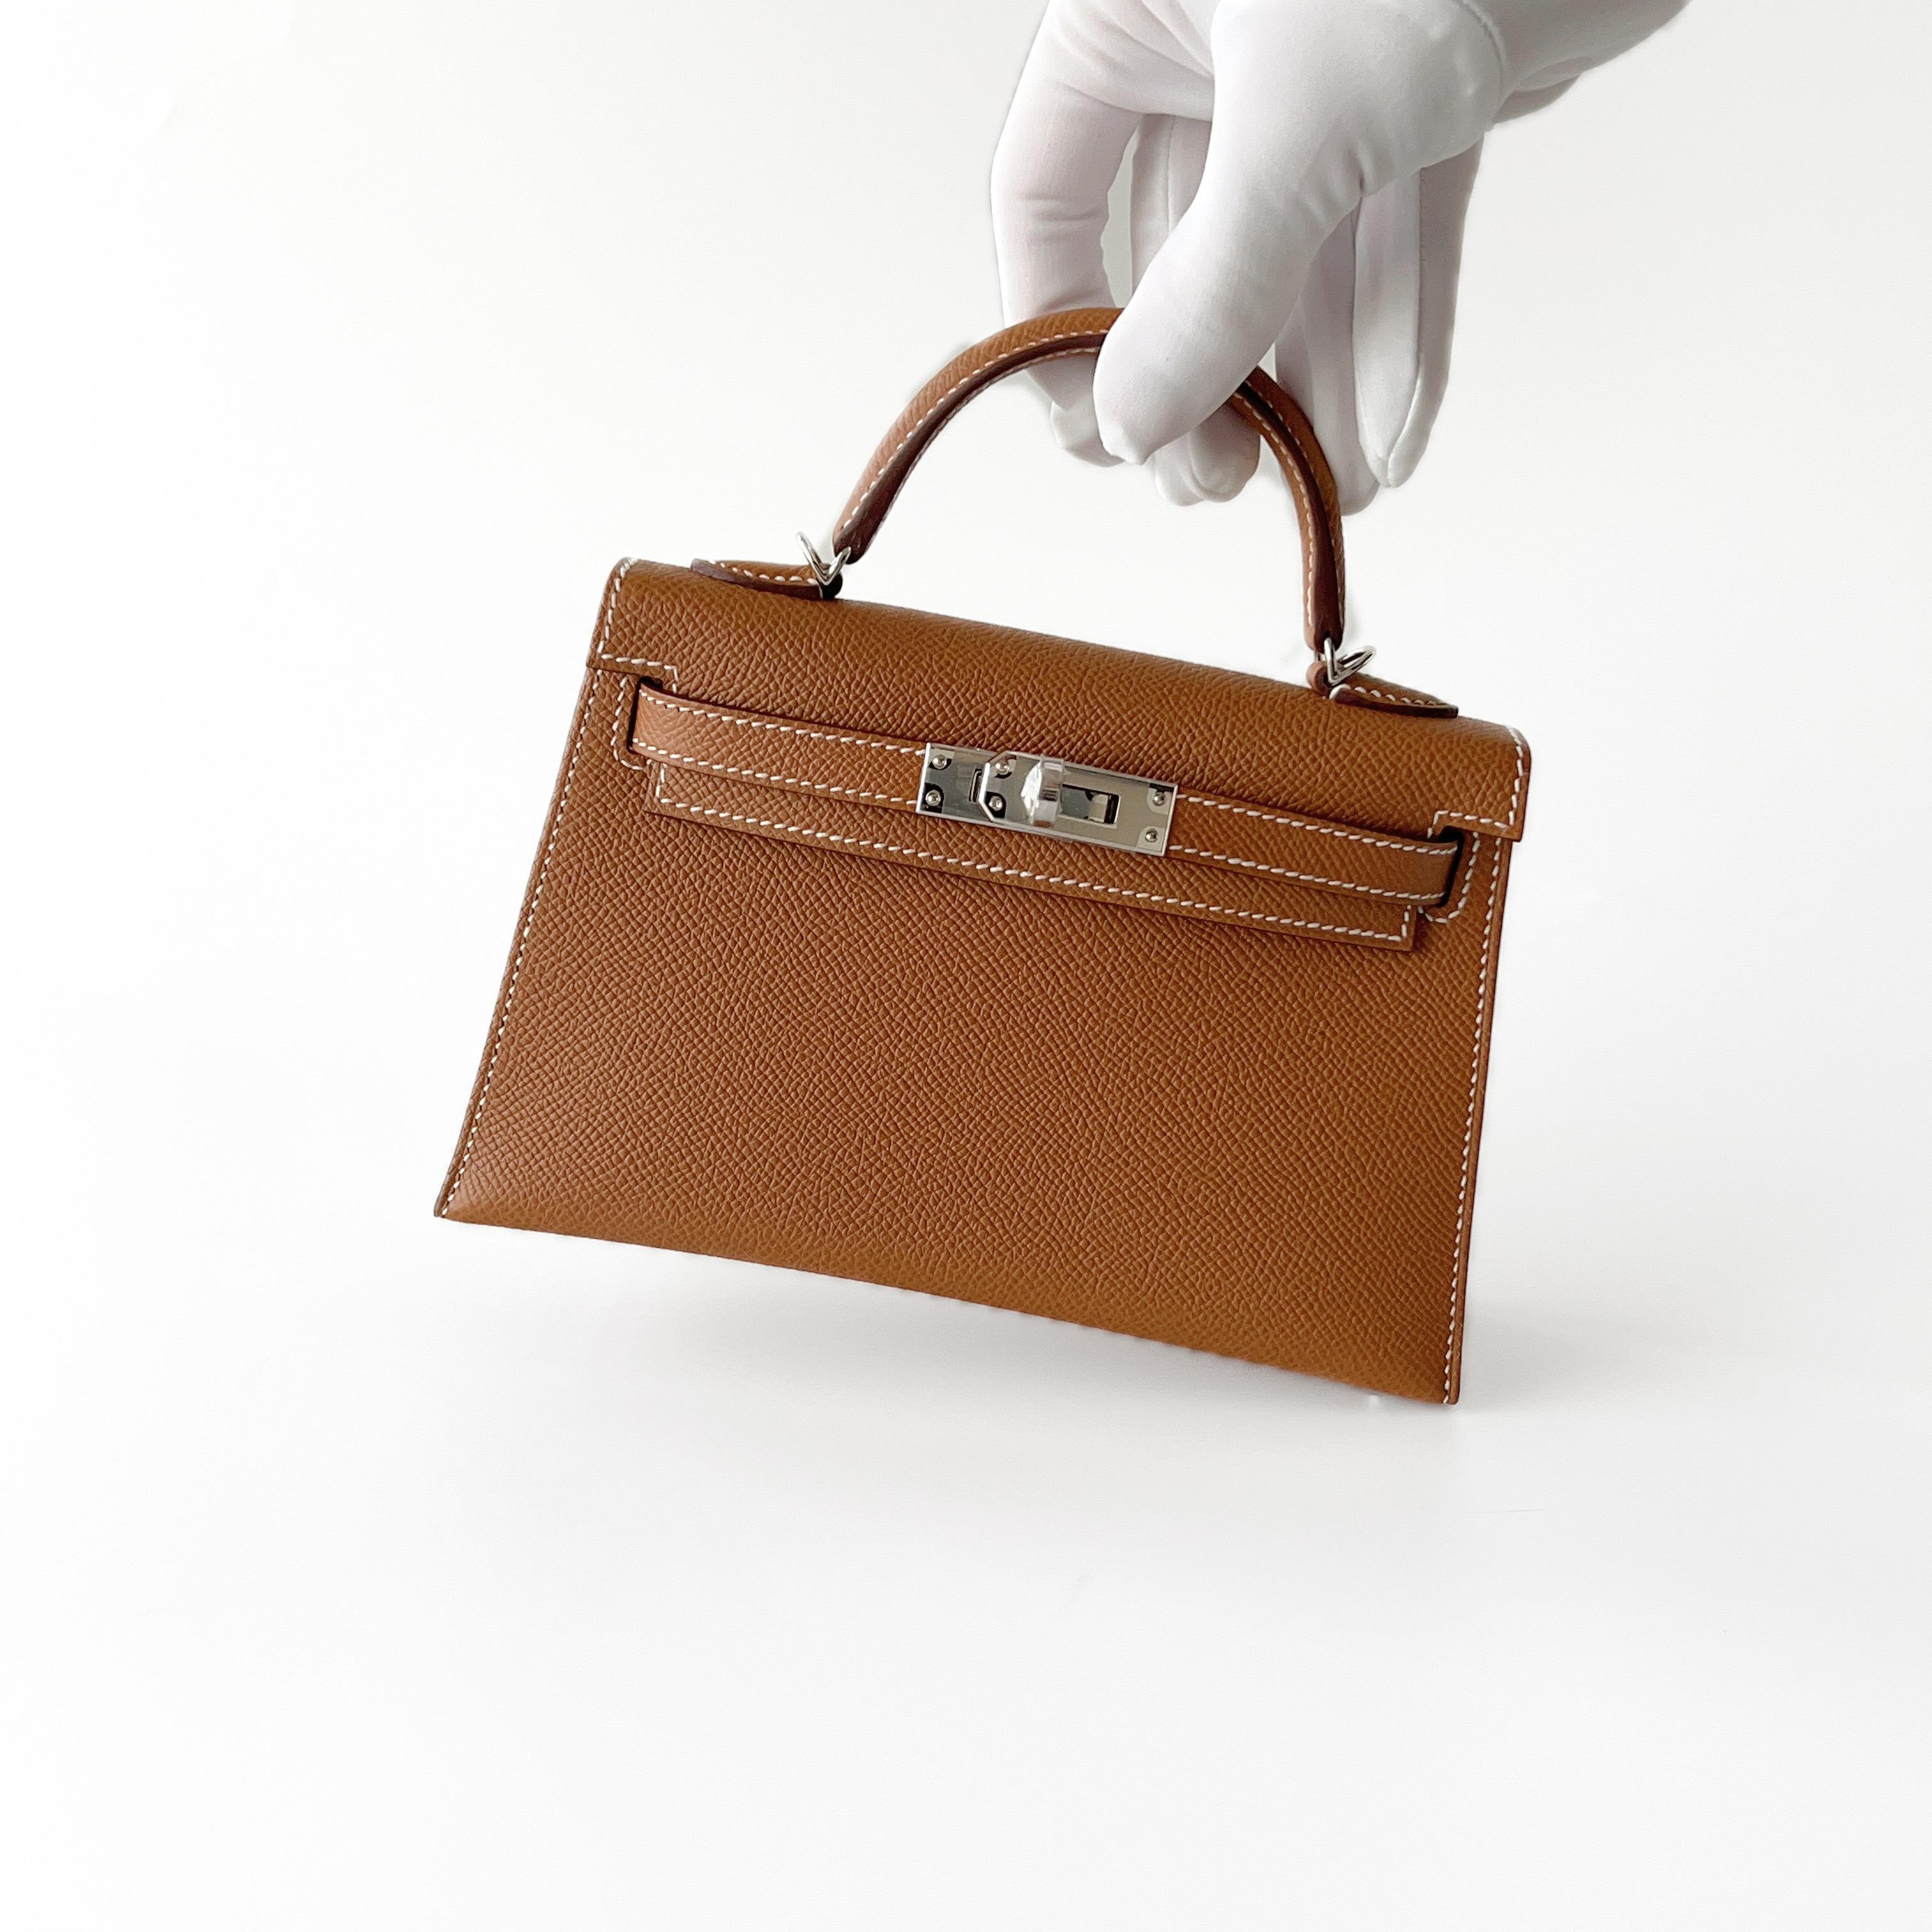 Shop this classic Hermes Mini Kelly In Gold With Palladium Plated Hardware, Epsom Leather. This Hermes Mini Kelly II comes in Sellier Epsom Leather making it hold its shape. The base has 4 palladium plated feet to prevent scratching to the bottom of